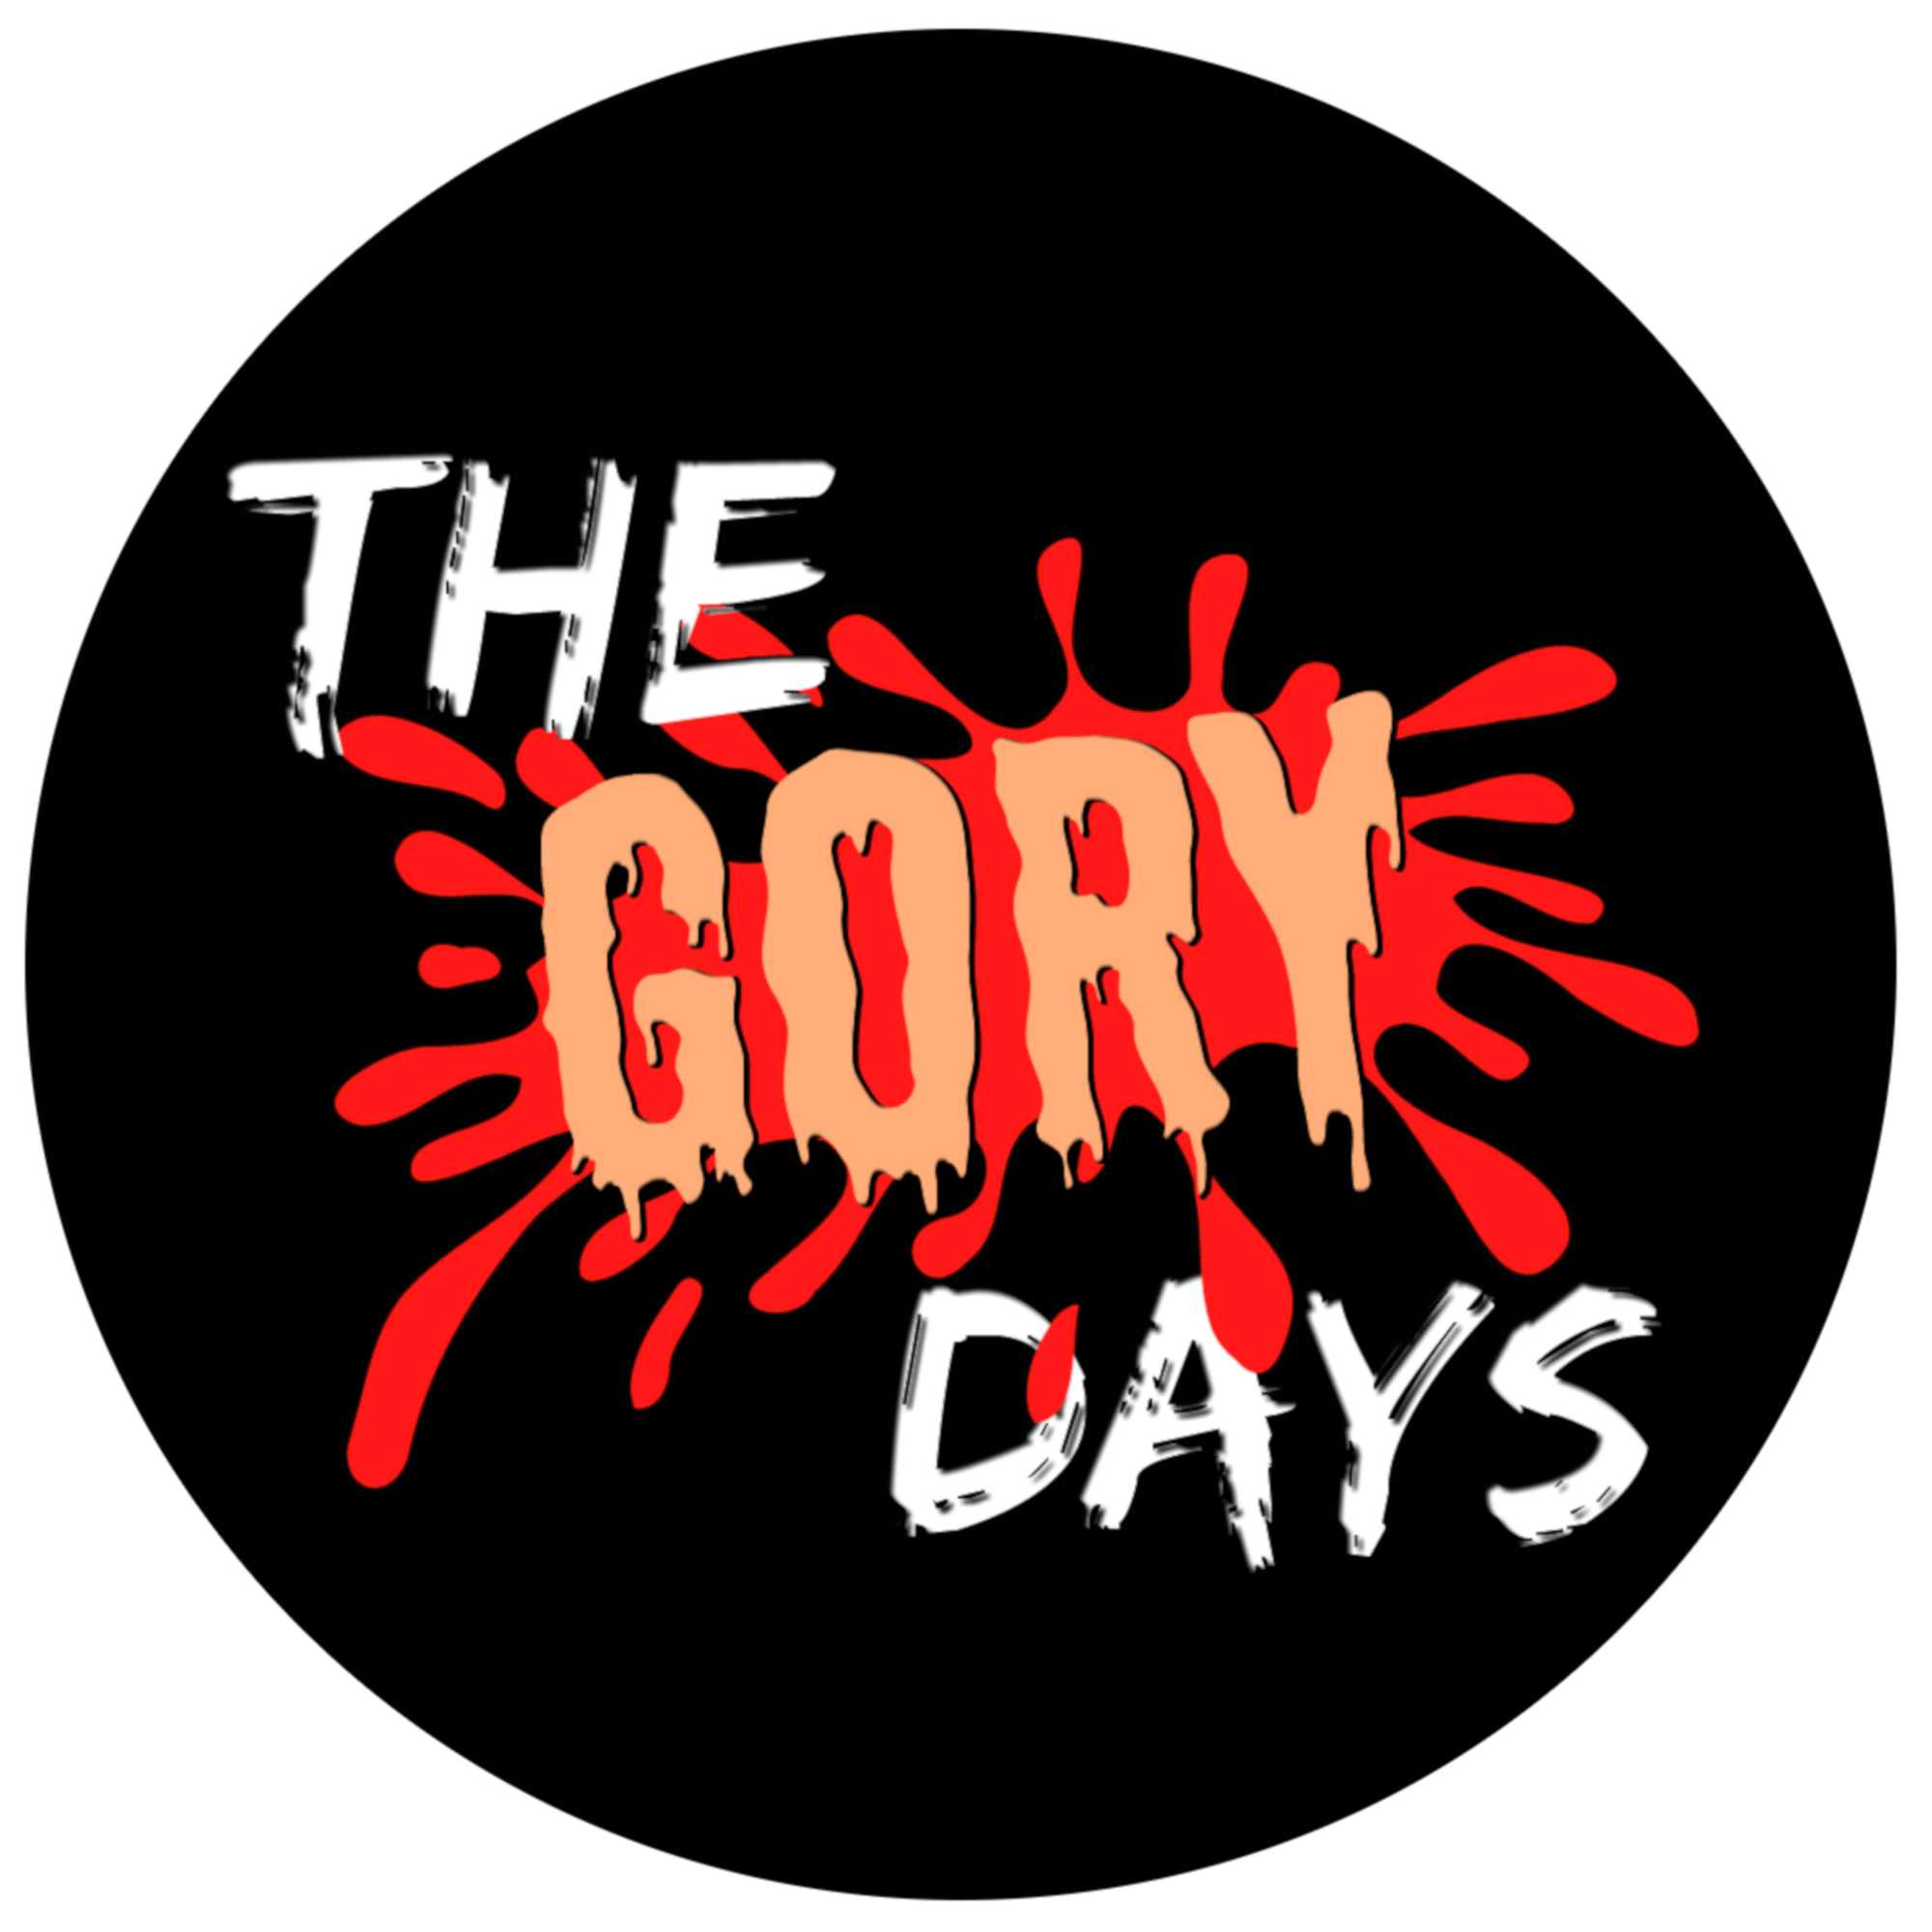 THE GORY DAYS